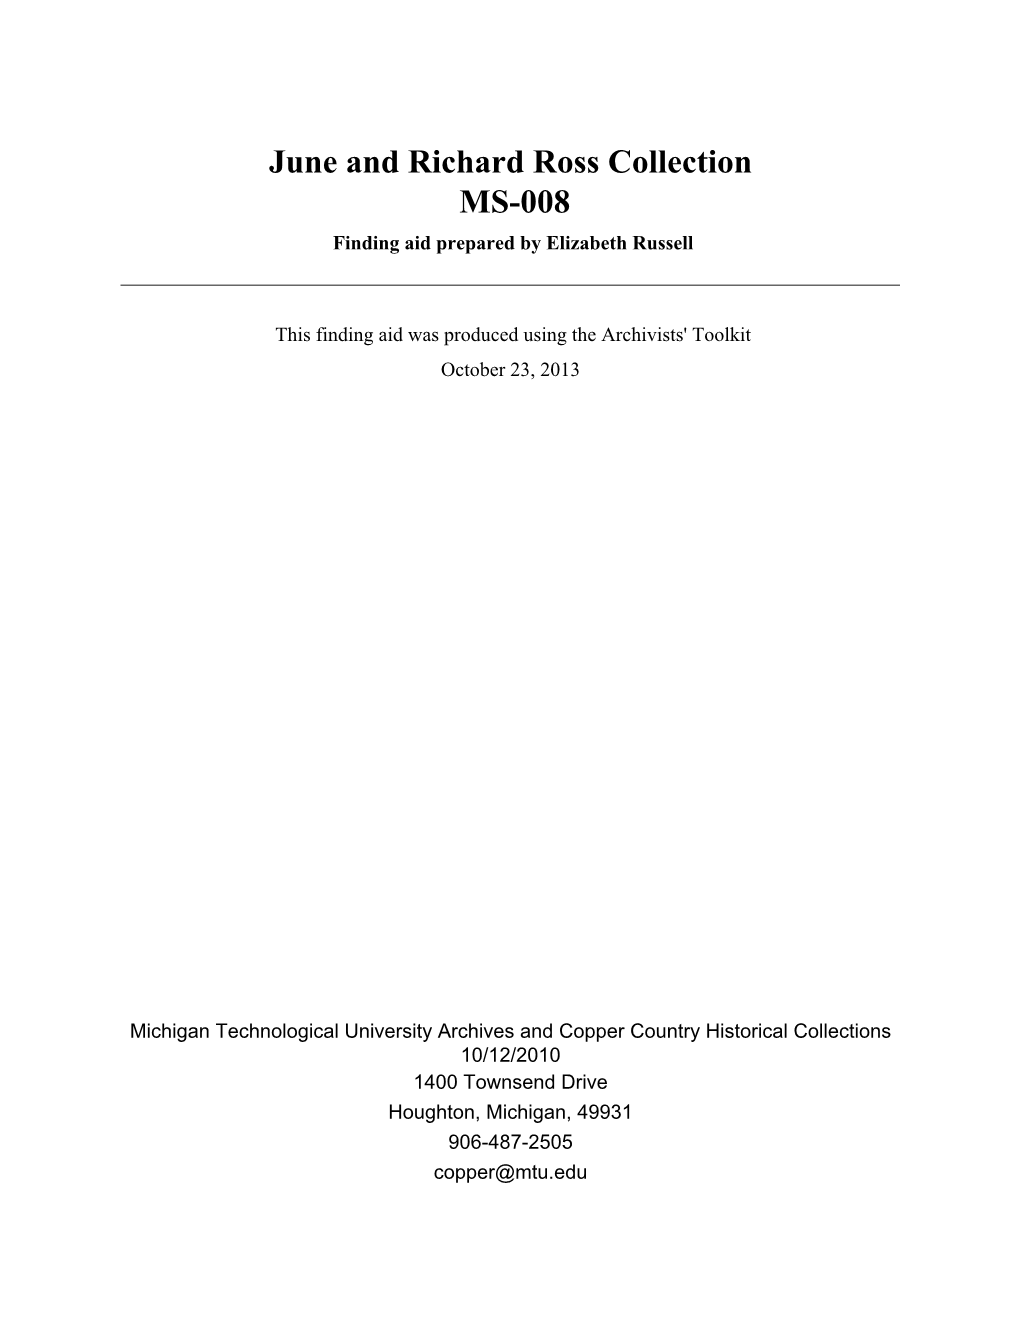 MS-008 — the June and Richard Ross Collection